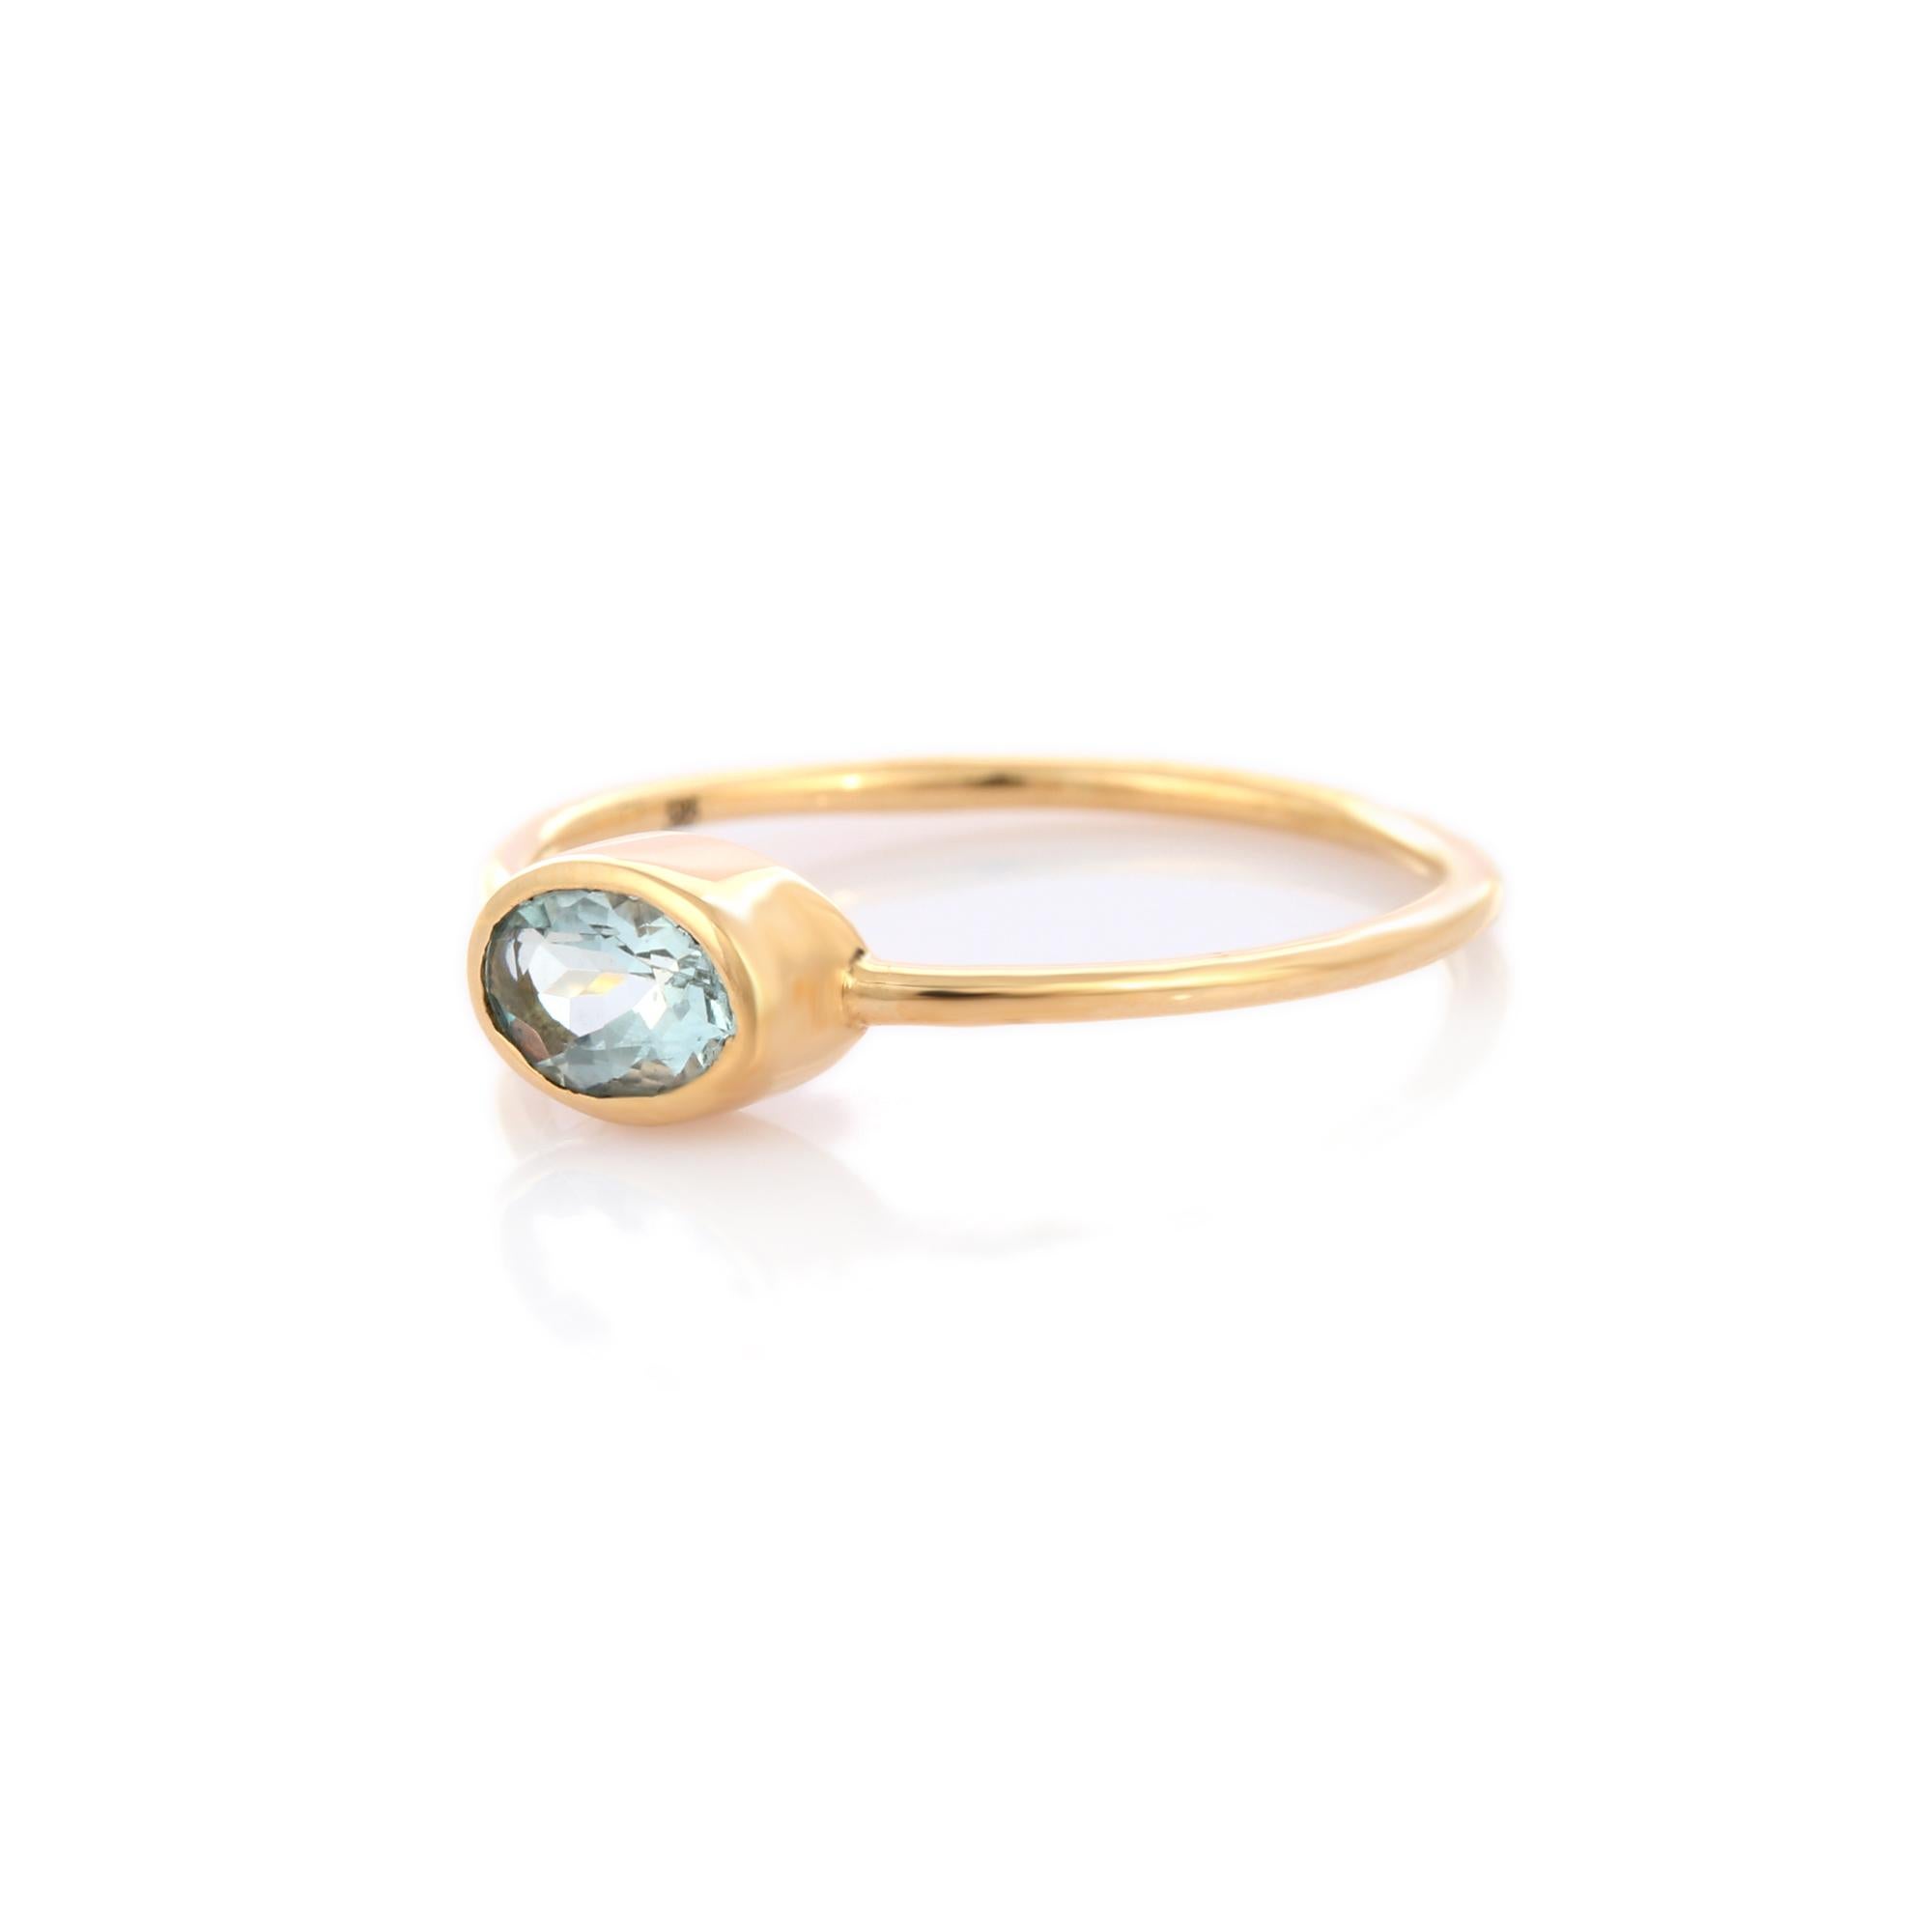 For Sale:  Oval Cut Natural Aquamarine Solitaire Ring in 14K Yellow Gold 3